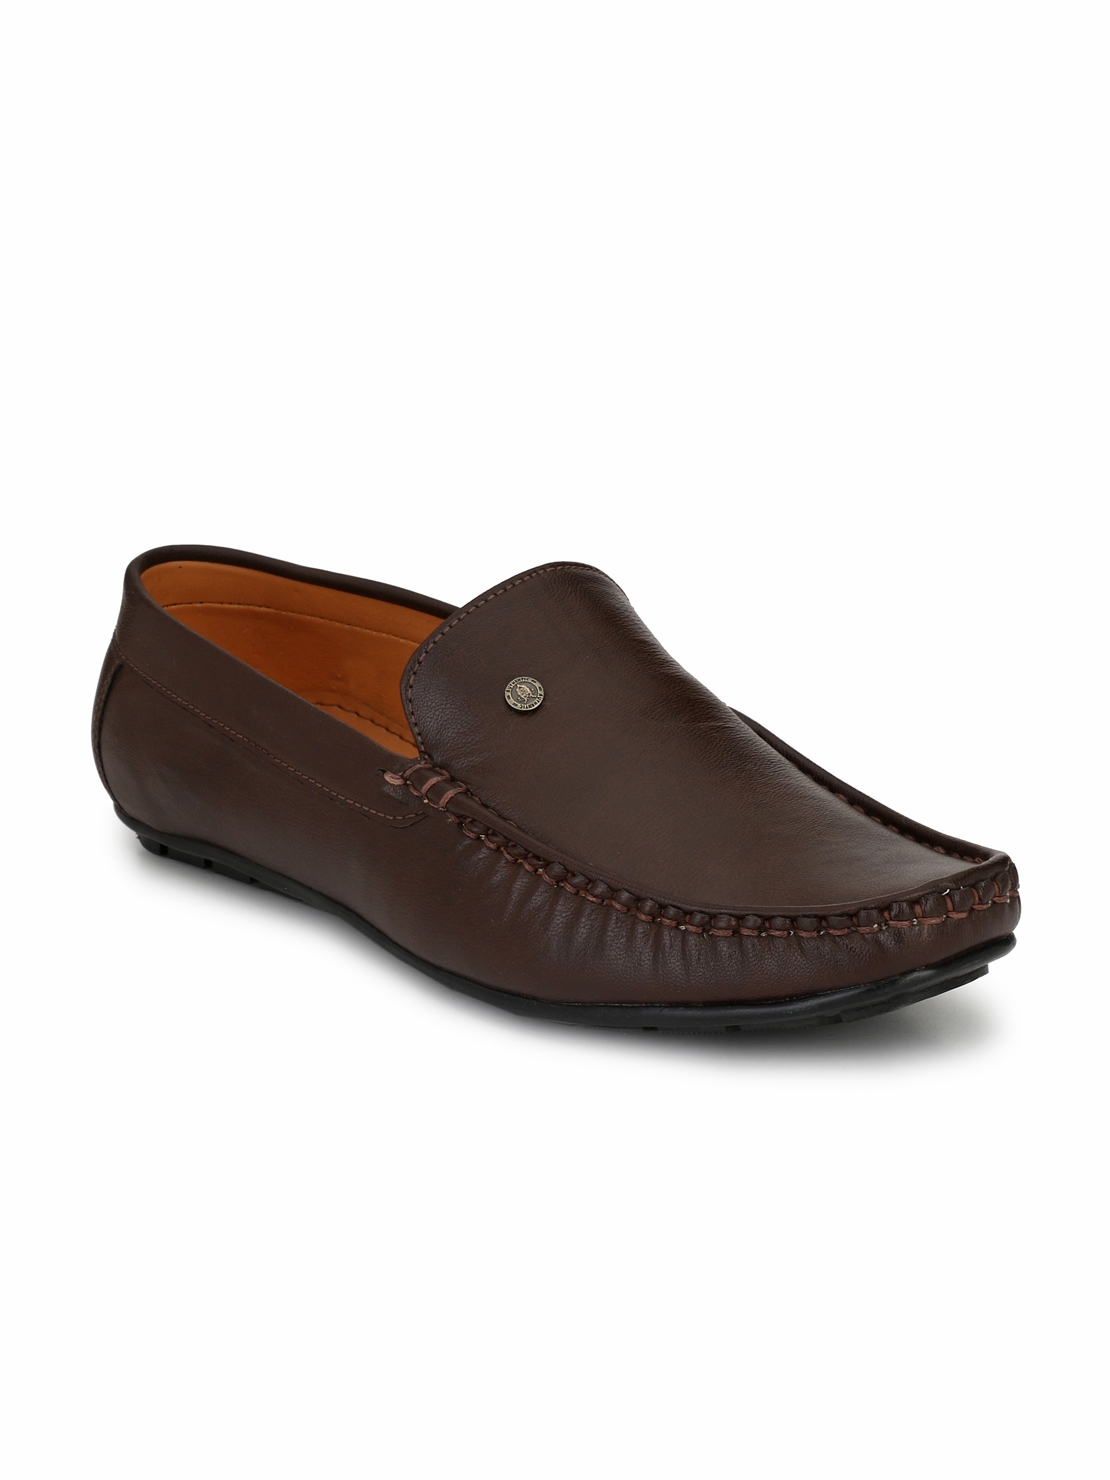 Guava | Men's Casual loafer Shoe - Brown